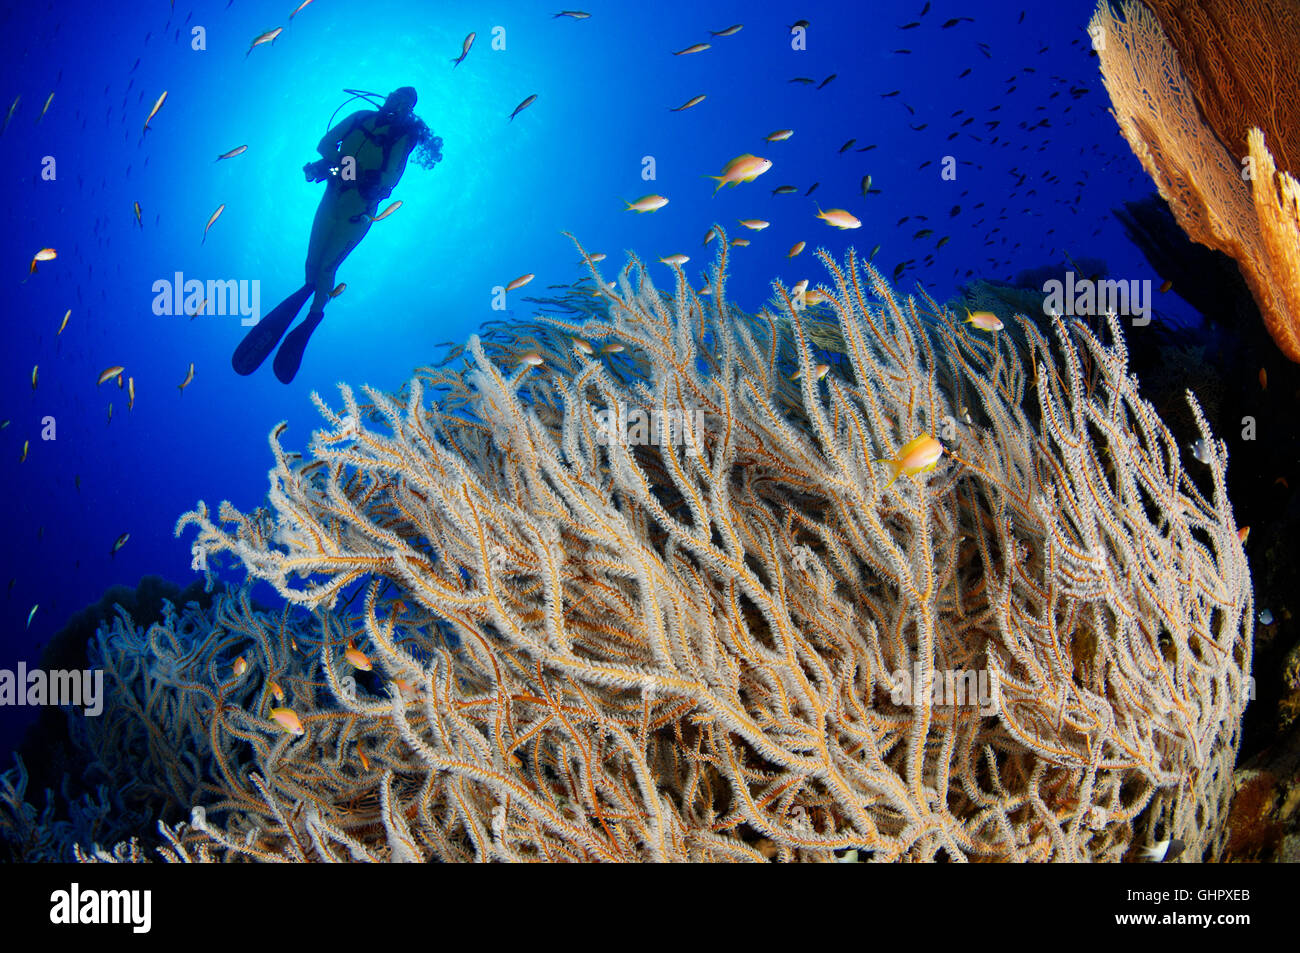 Subergorgia sp., Coral reef and Gorgonian and scuba diver, Hurghada, Giftun Island Reef, Red Sea, Egypt, Africa Stock Photo